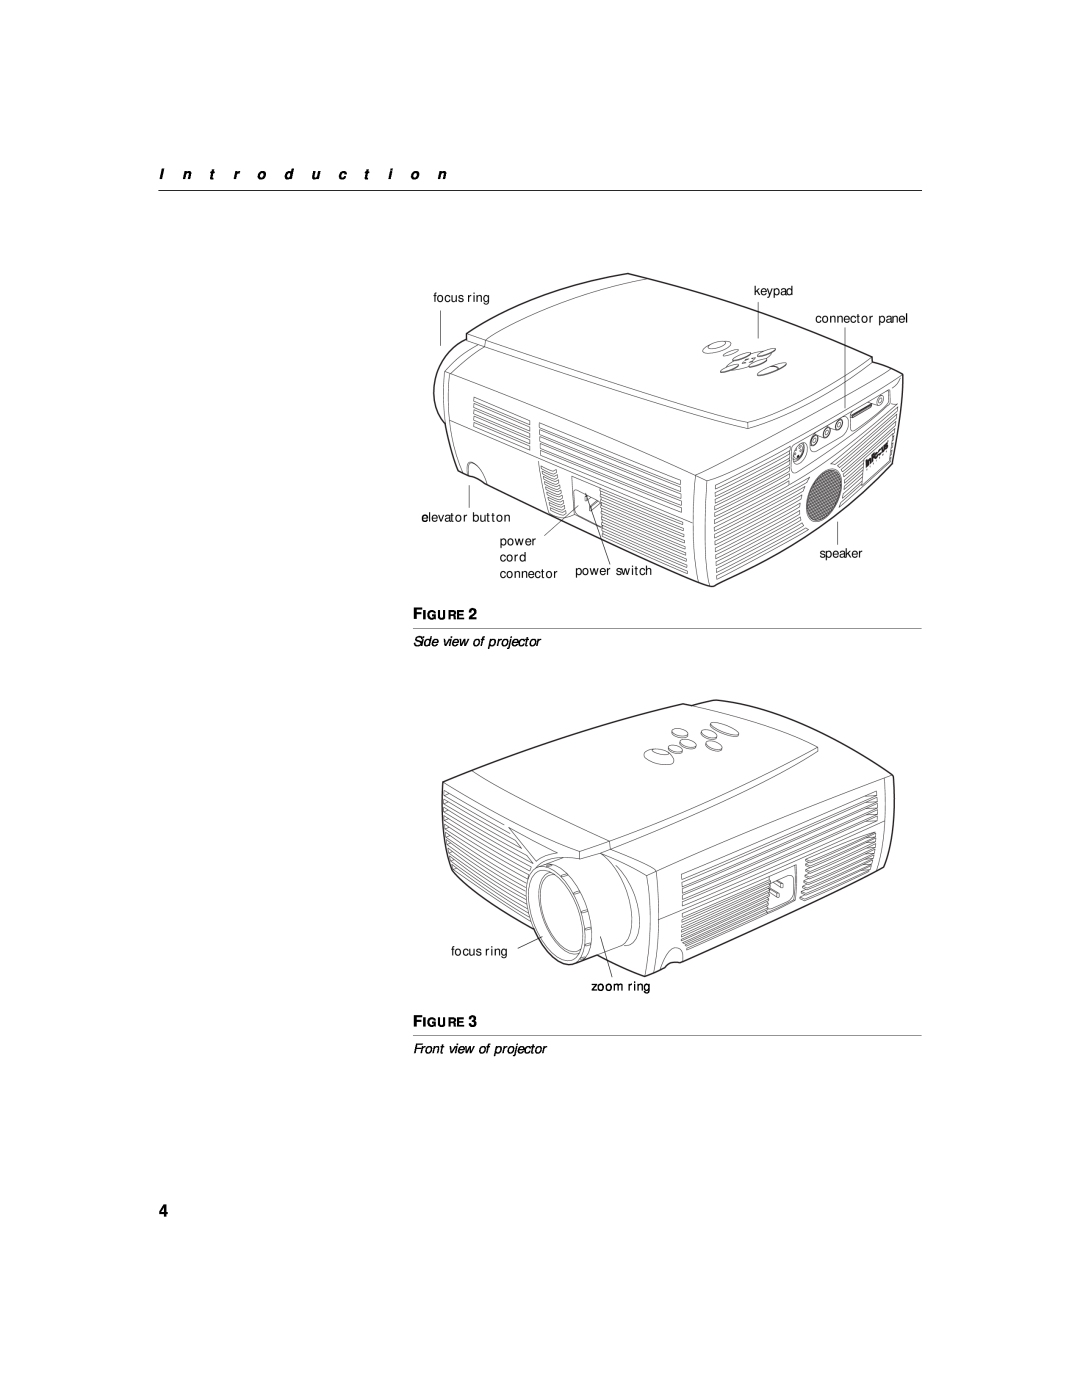 InFocus LPTM425z warranty I n t r o d u c t i o n, Side view of projector, Front view of projector, speaker, keypad 